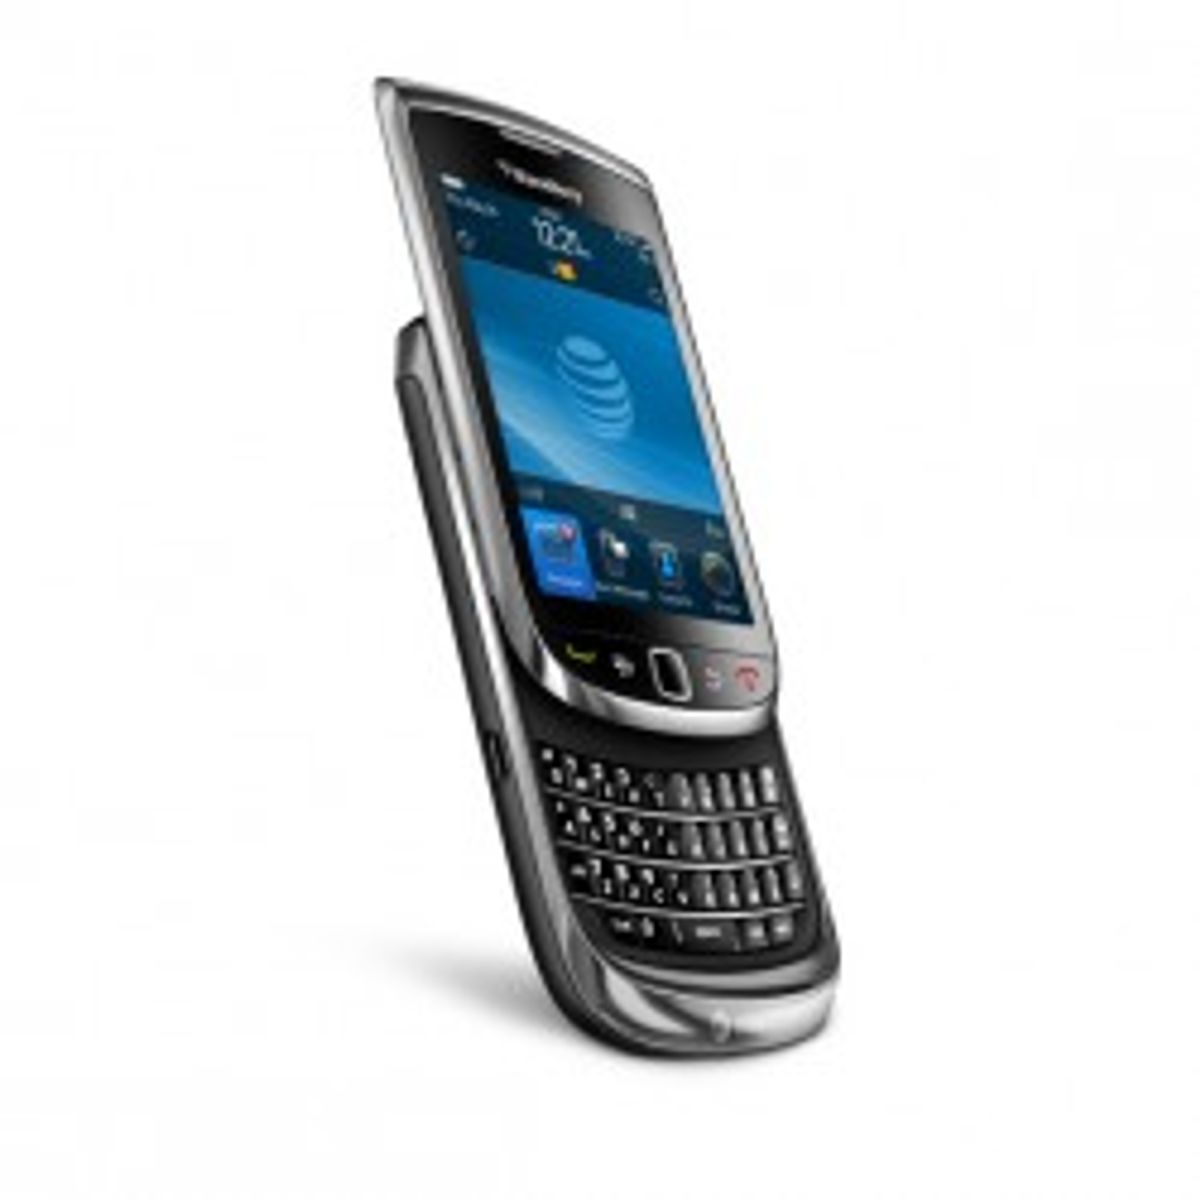 The new Blackberry 9800 Torch  